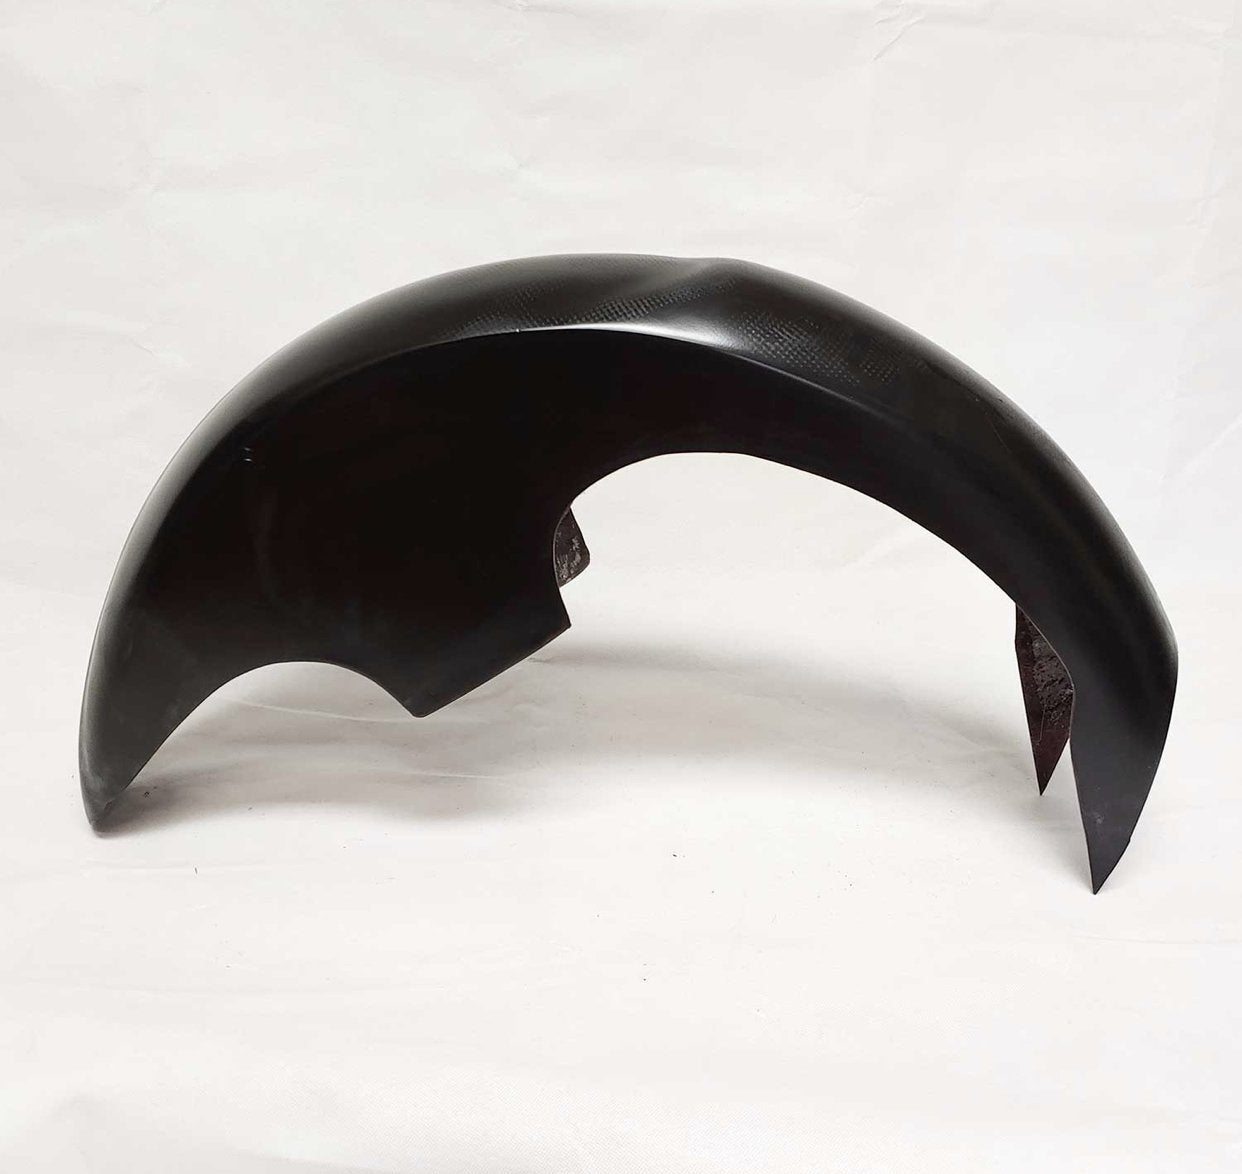 Motorcycle Front Fender - The 23″ Full Wrap "Ground Pounder" fits American Made & Metric